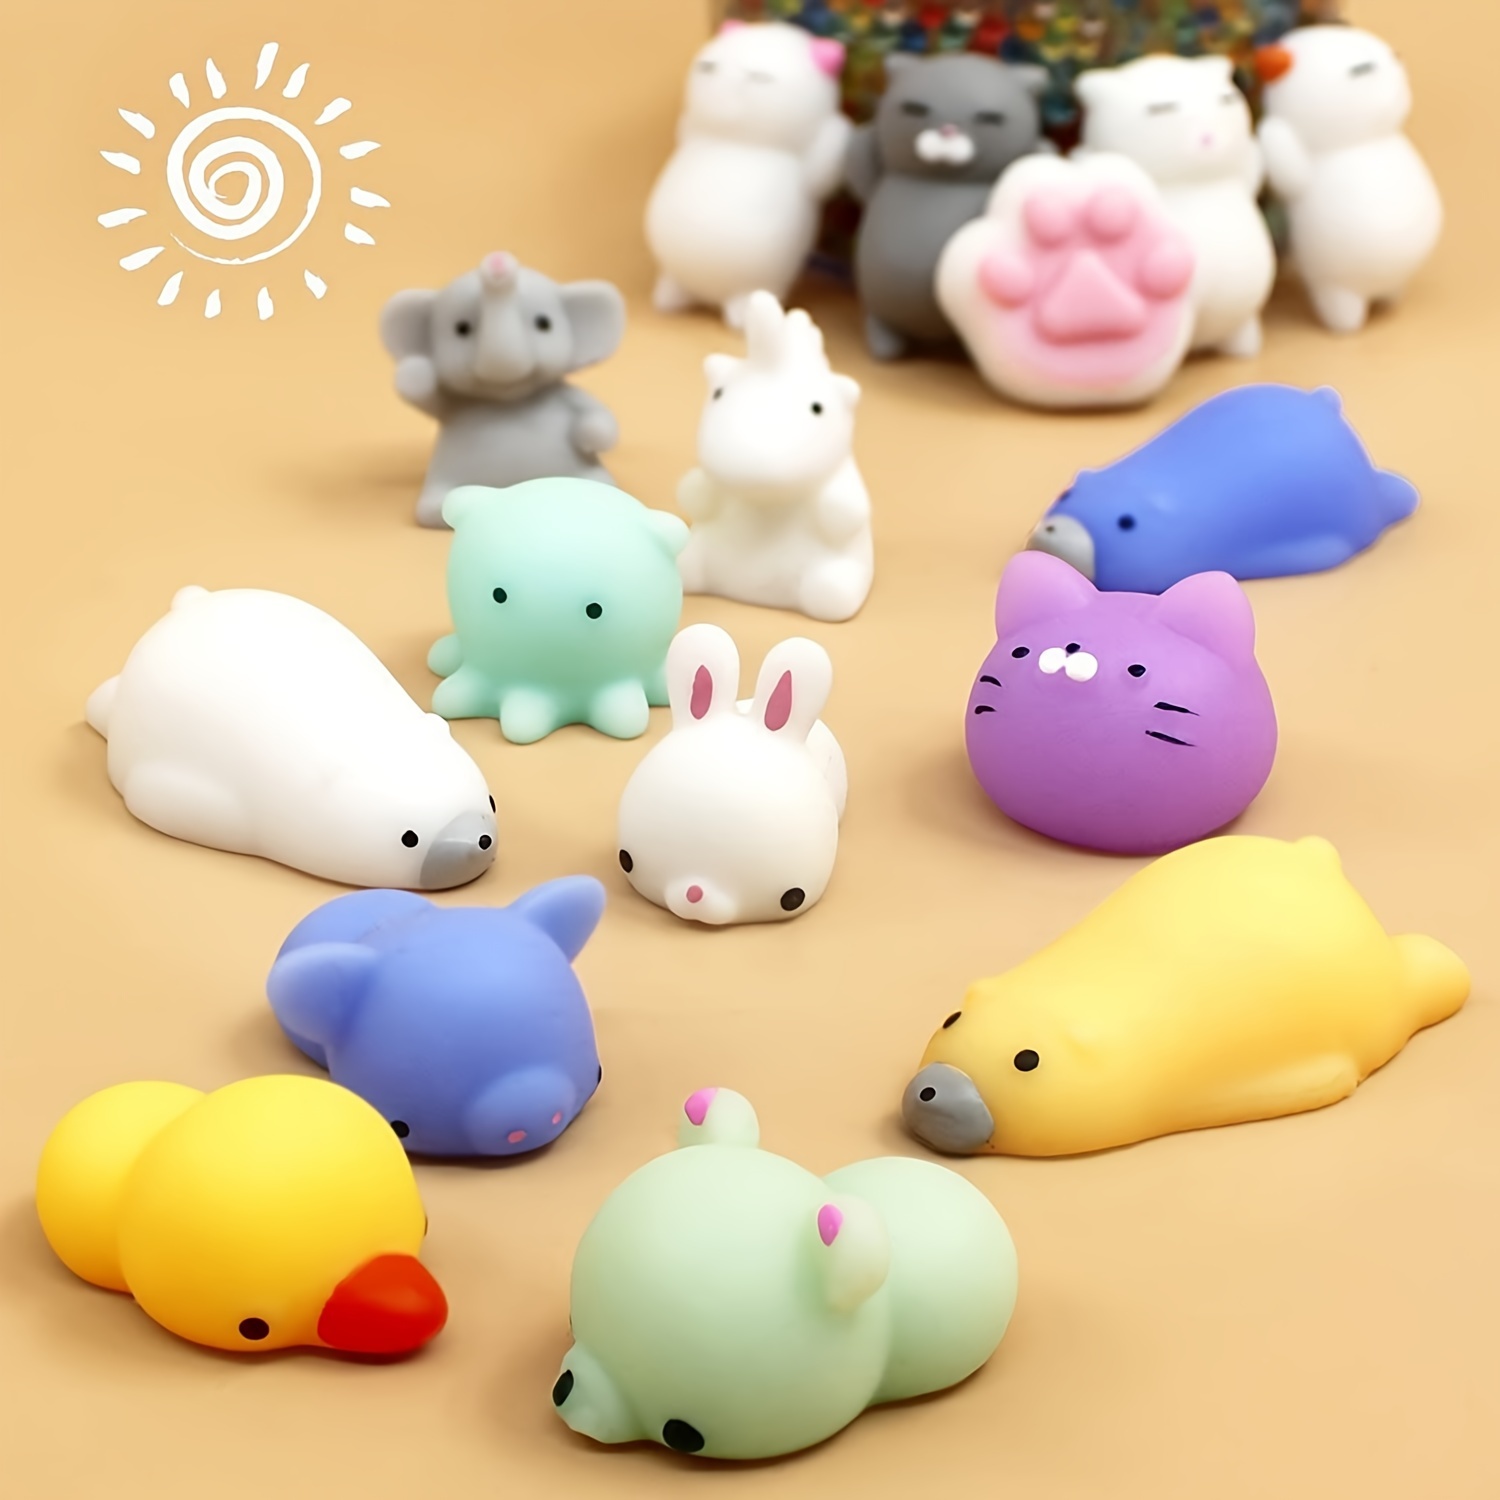 72 Pcs Kawaii Squishies, Mochi Squishy Toys For Kids Party Favors